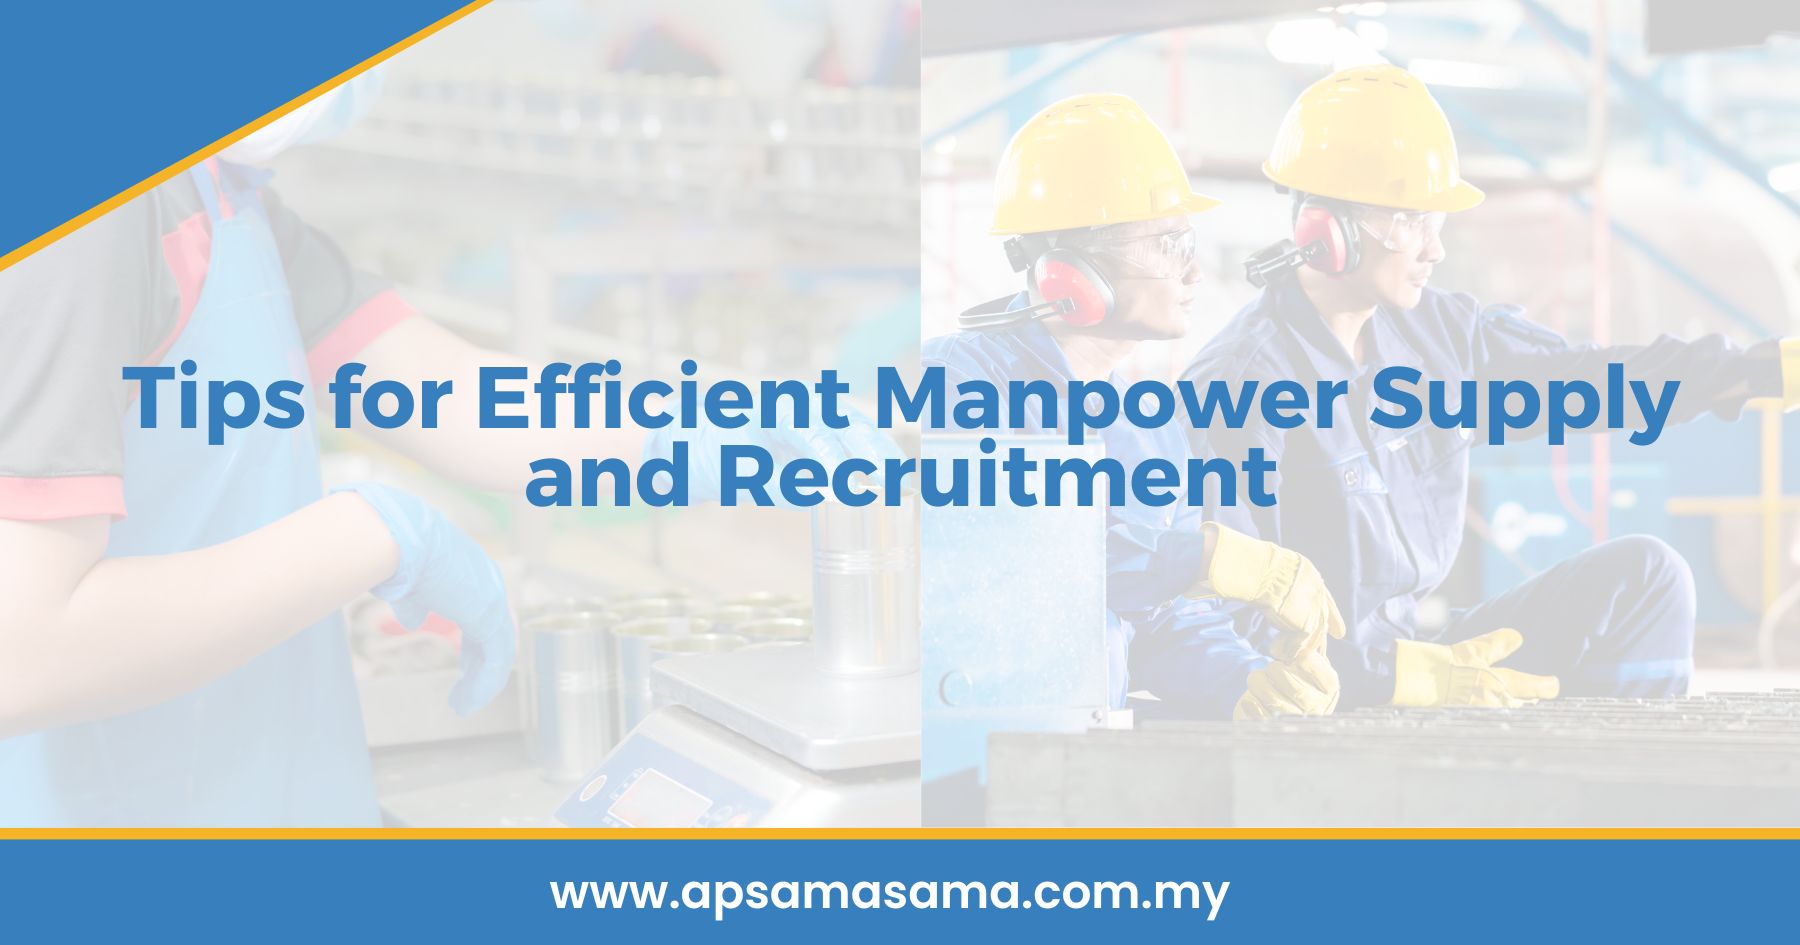 Tips for Efficient Manpower Supply and Recruitment